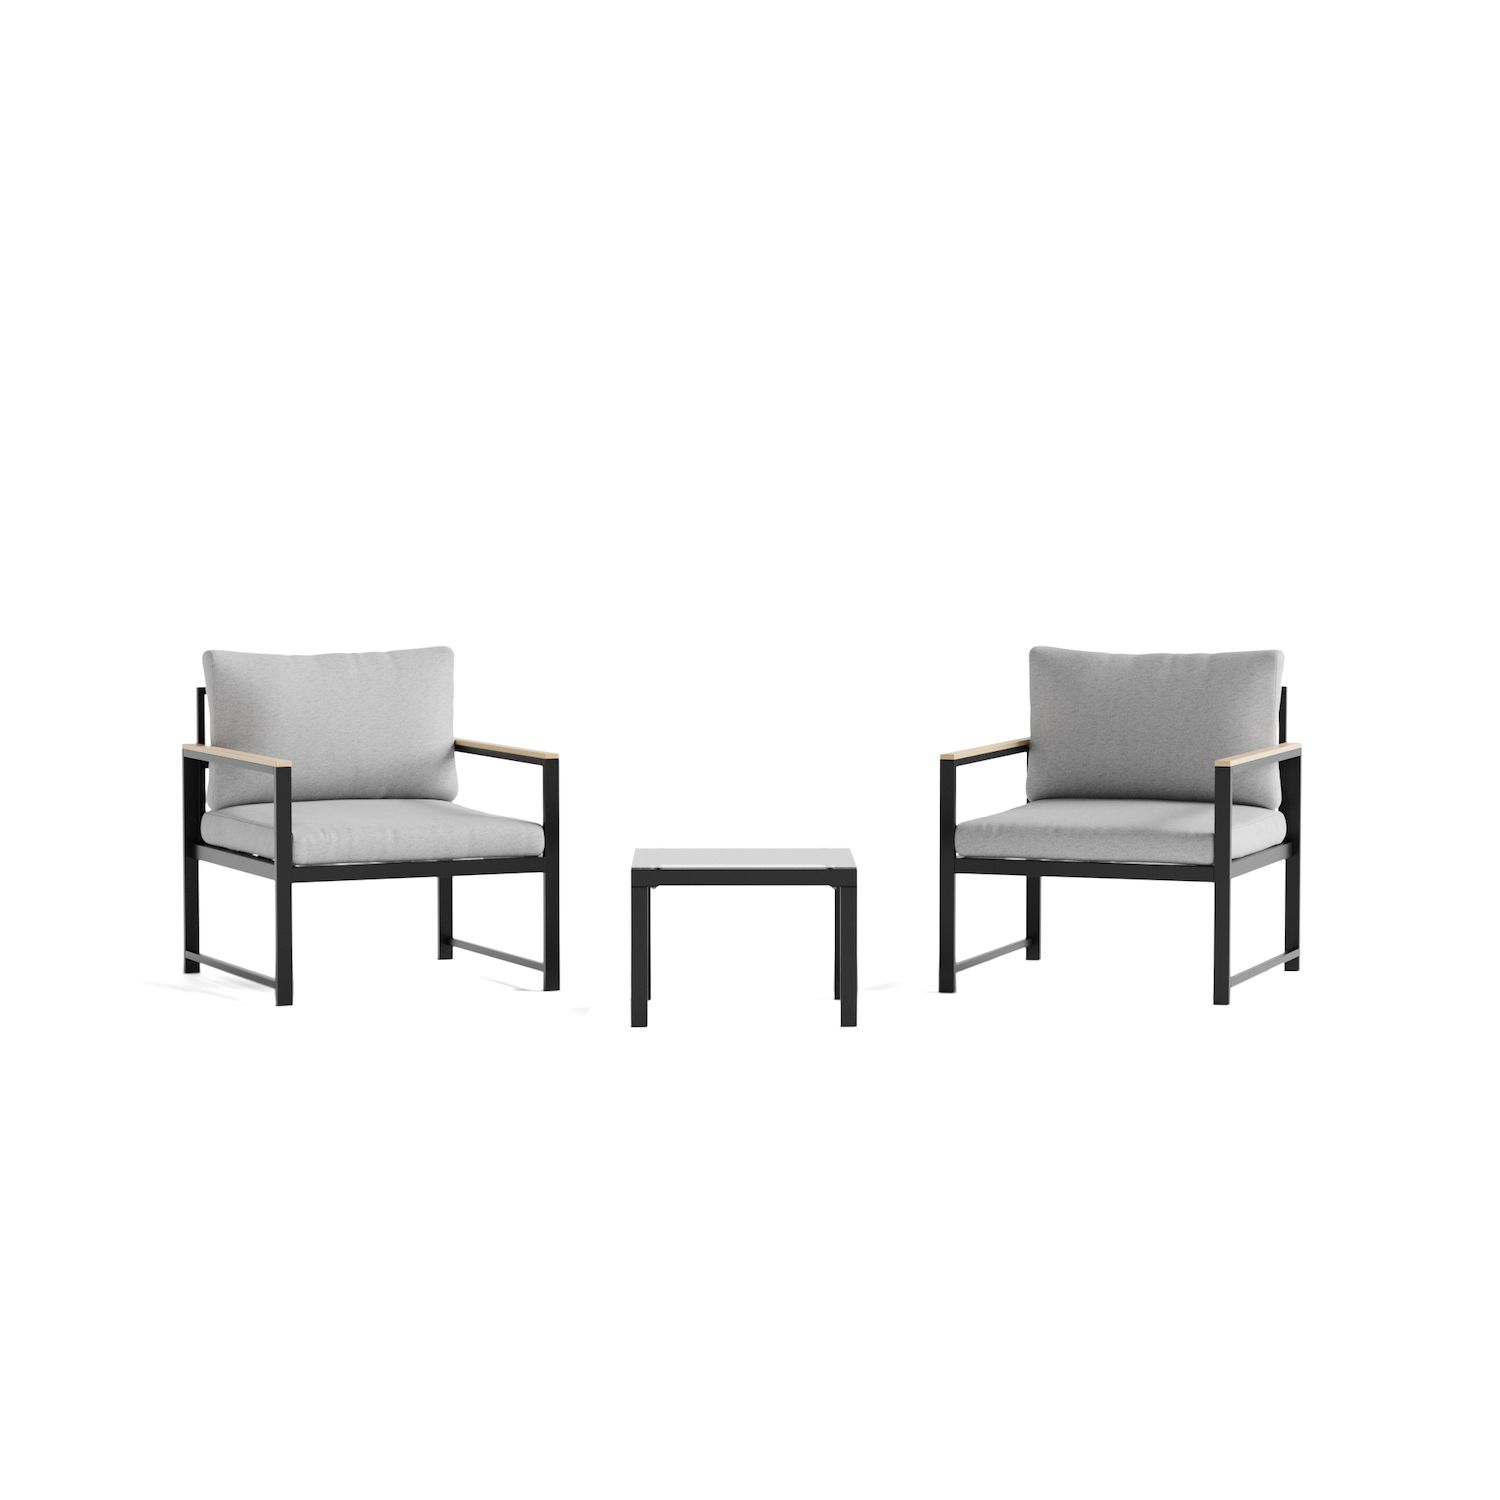 Image for Dream Collection Lucid Outdoor Conversation Patio Arm Chair & End Table 3-piece Set at Kohl's.